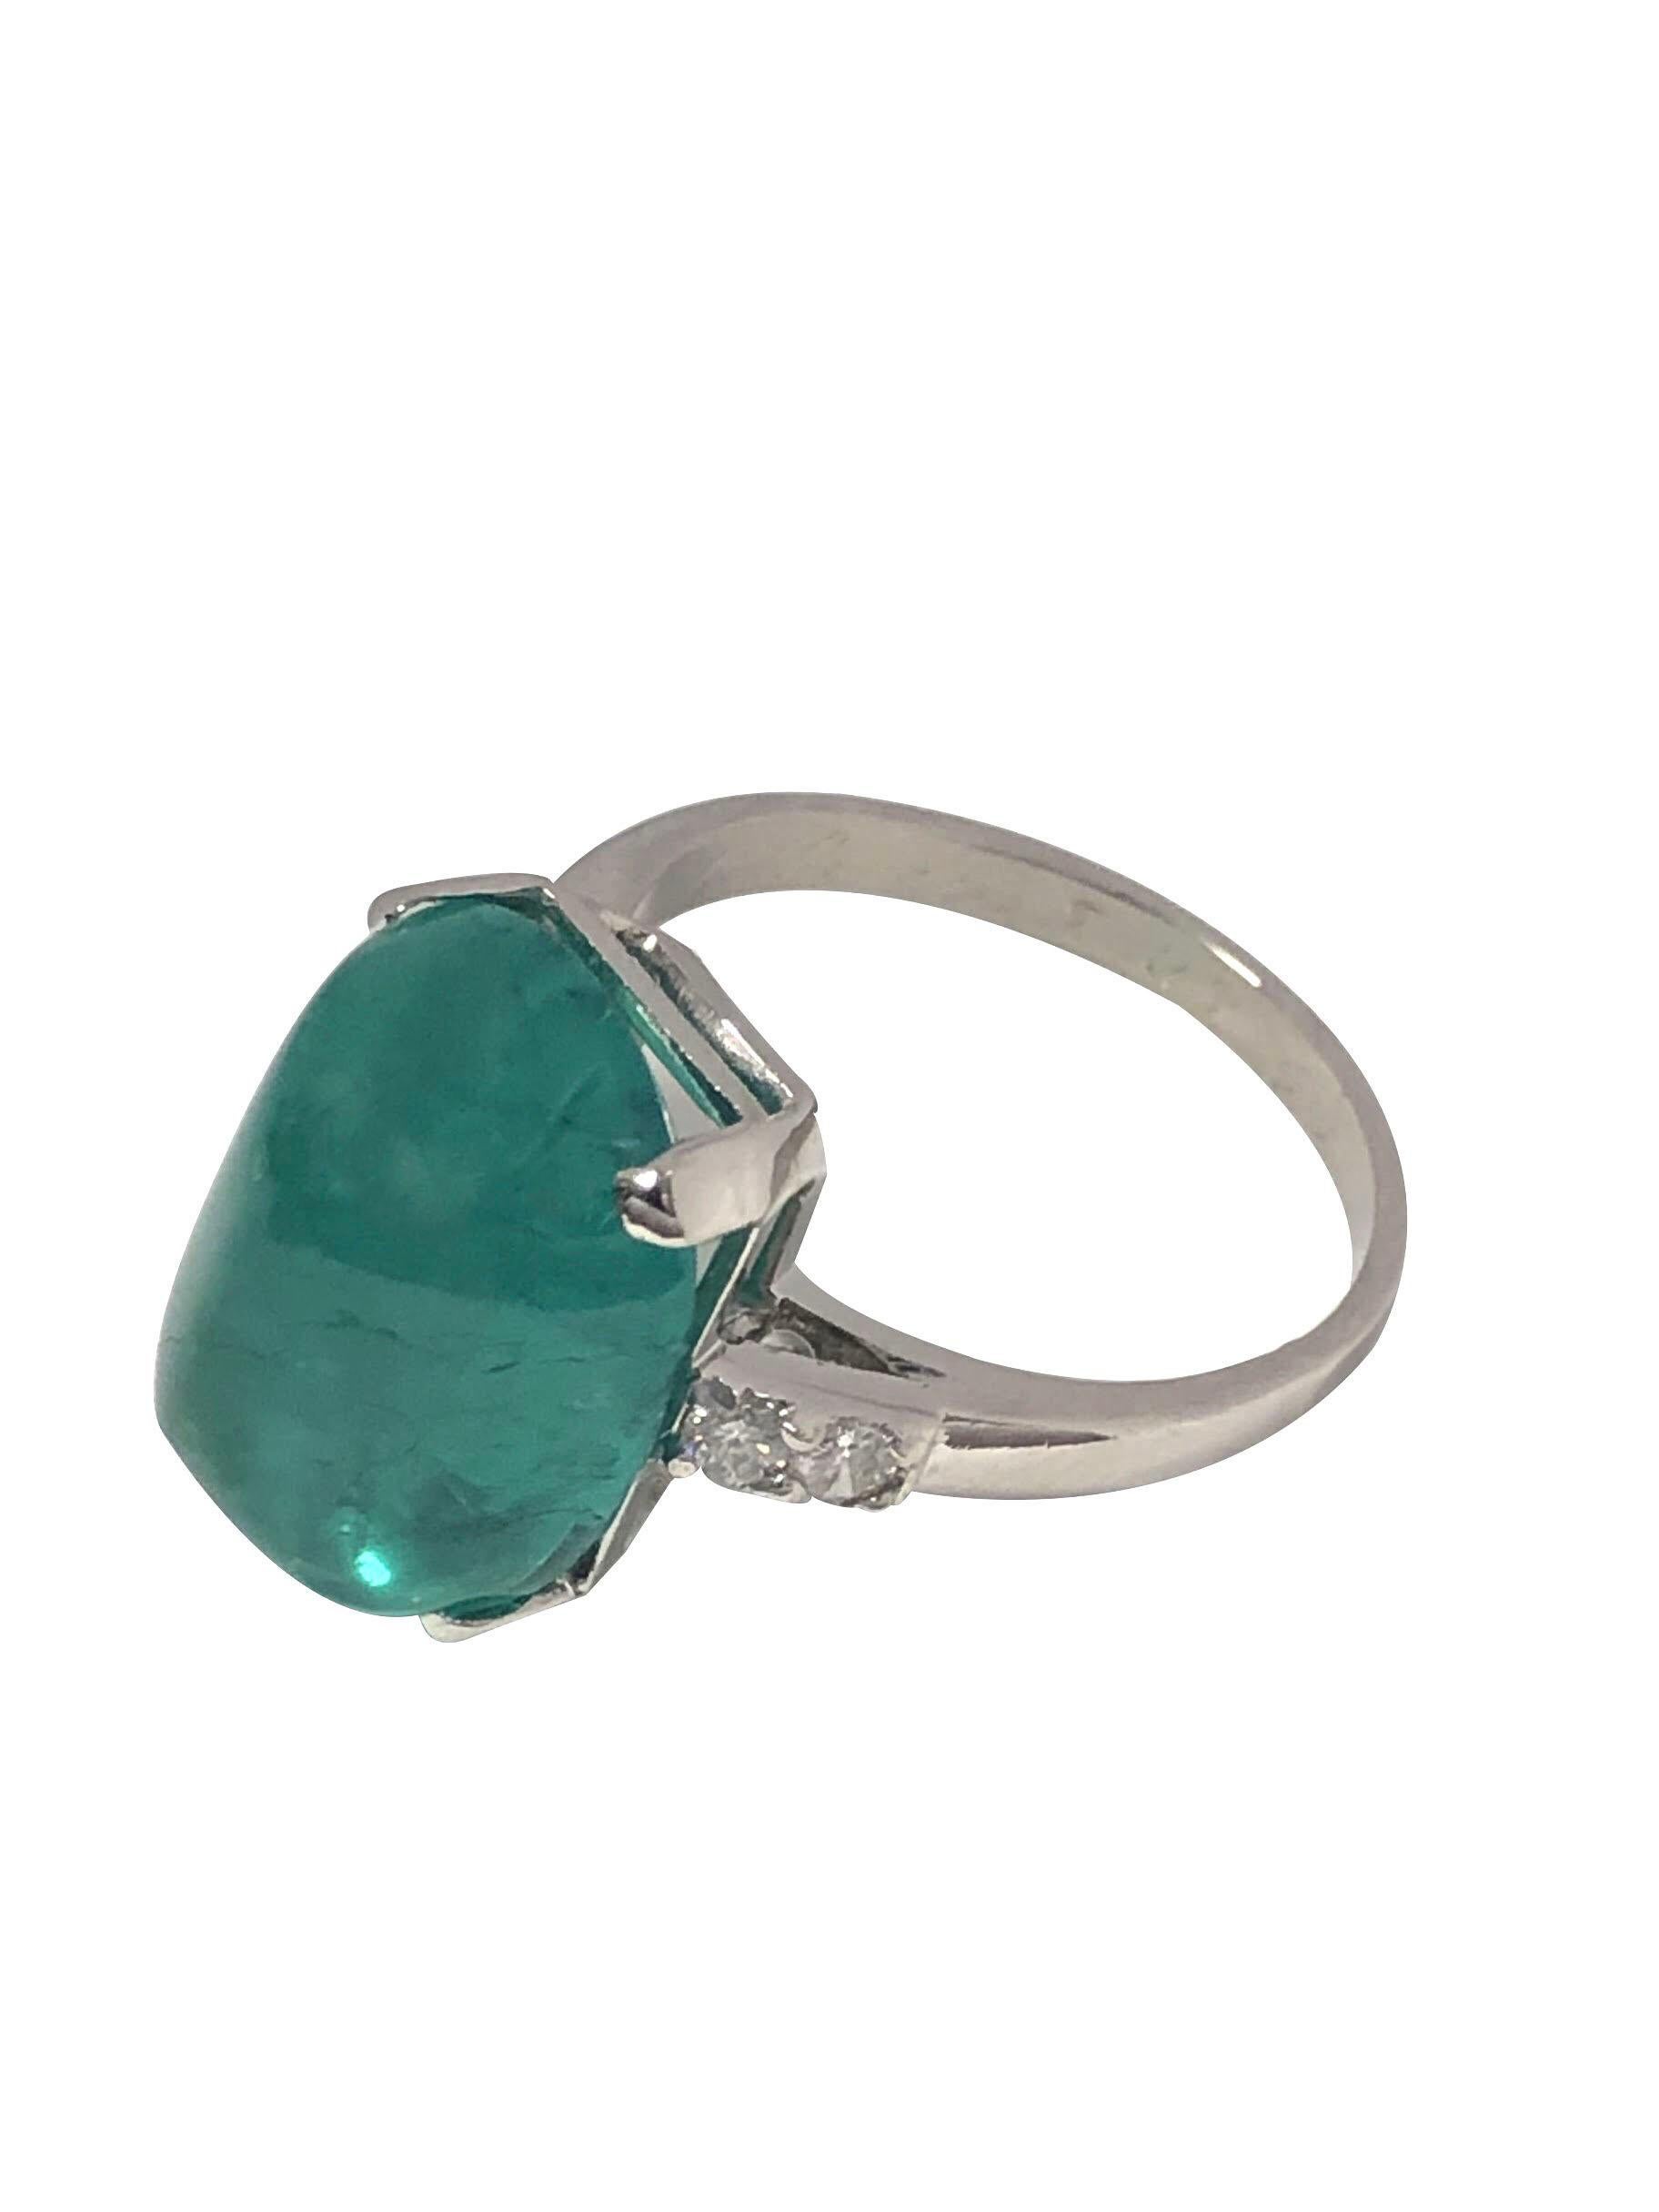 Circa 1940 Platinum Ladies Ring, Centrally set with a G.I.A Certified 10.81 Carats Sugarloaf Emerald of Russian origin, Very Fine Transparent Green in color and Having Moderate F2 Clarity enhancement treatment. Set in a Platinum Mounting with Basket